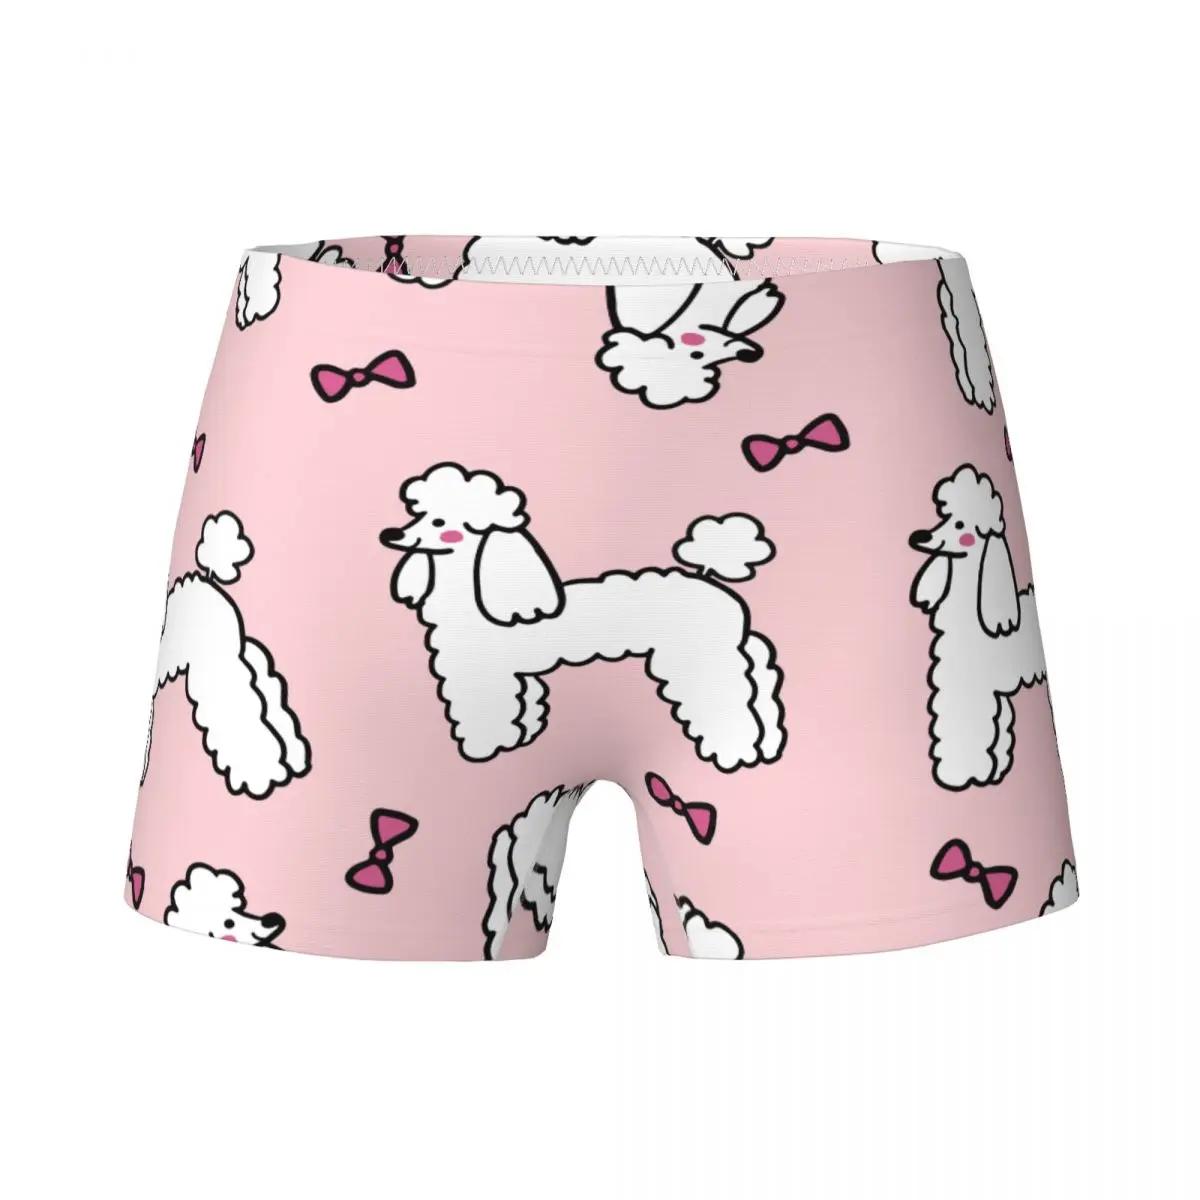 Young Girls Cute Poodle Dog Boxers Child Cotton Underwear Teenagers Gift for Animal Dogs Lover Underpants Briefs Siz